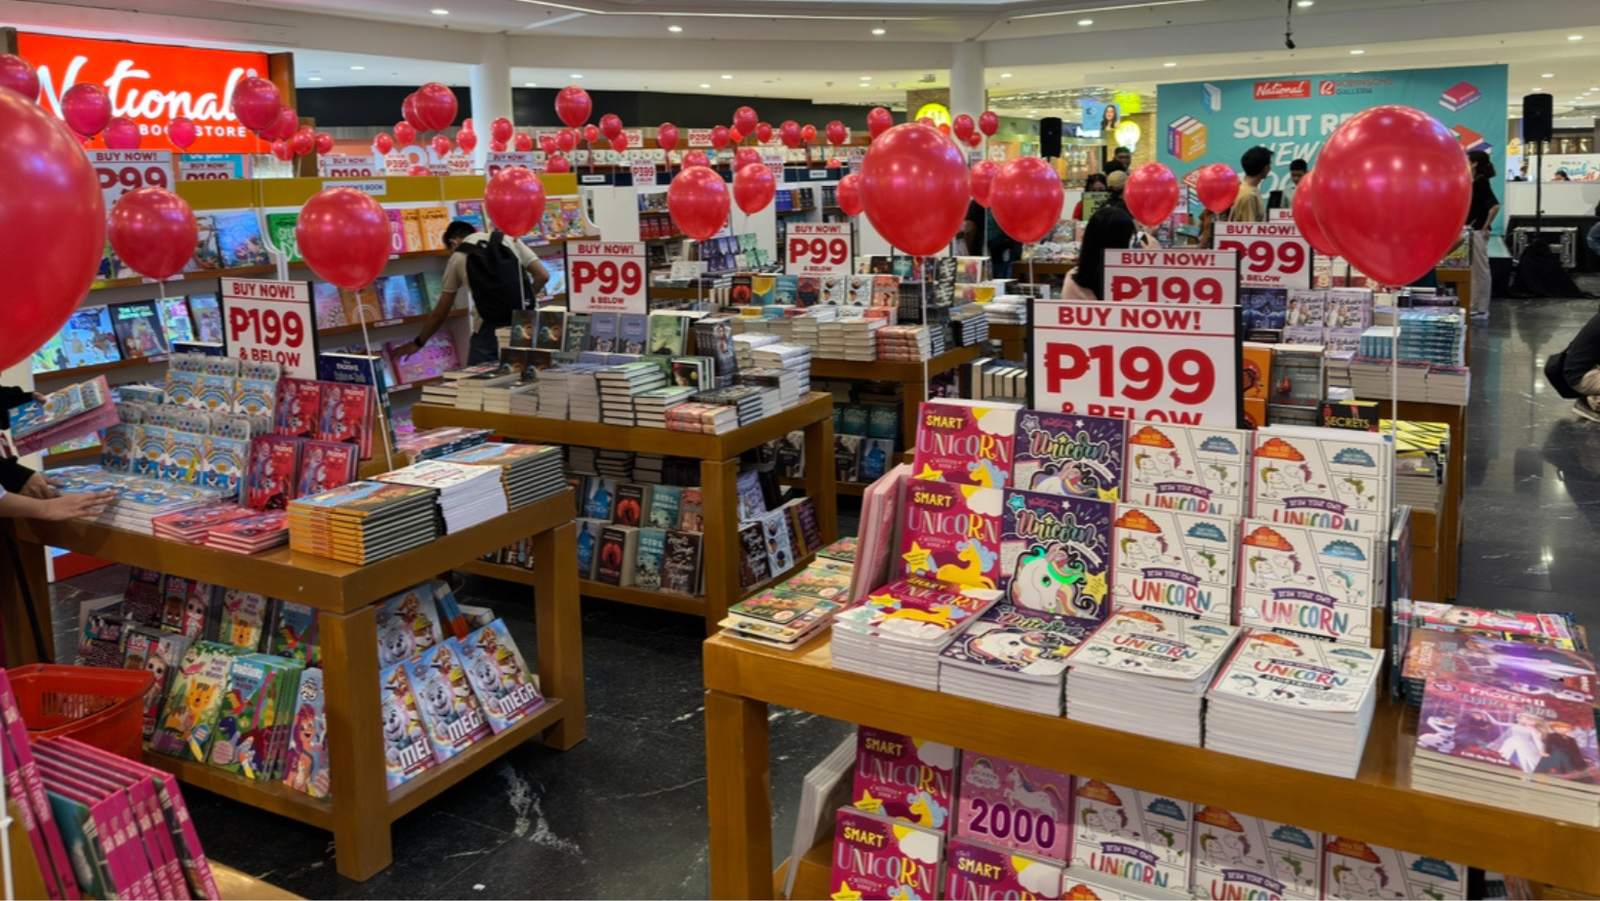 P99 Books, Buy 2 Get 1 FREE on Bestsellers, and Sulit School Supplies Are Up for Grabs at These Upcoming Fairs